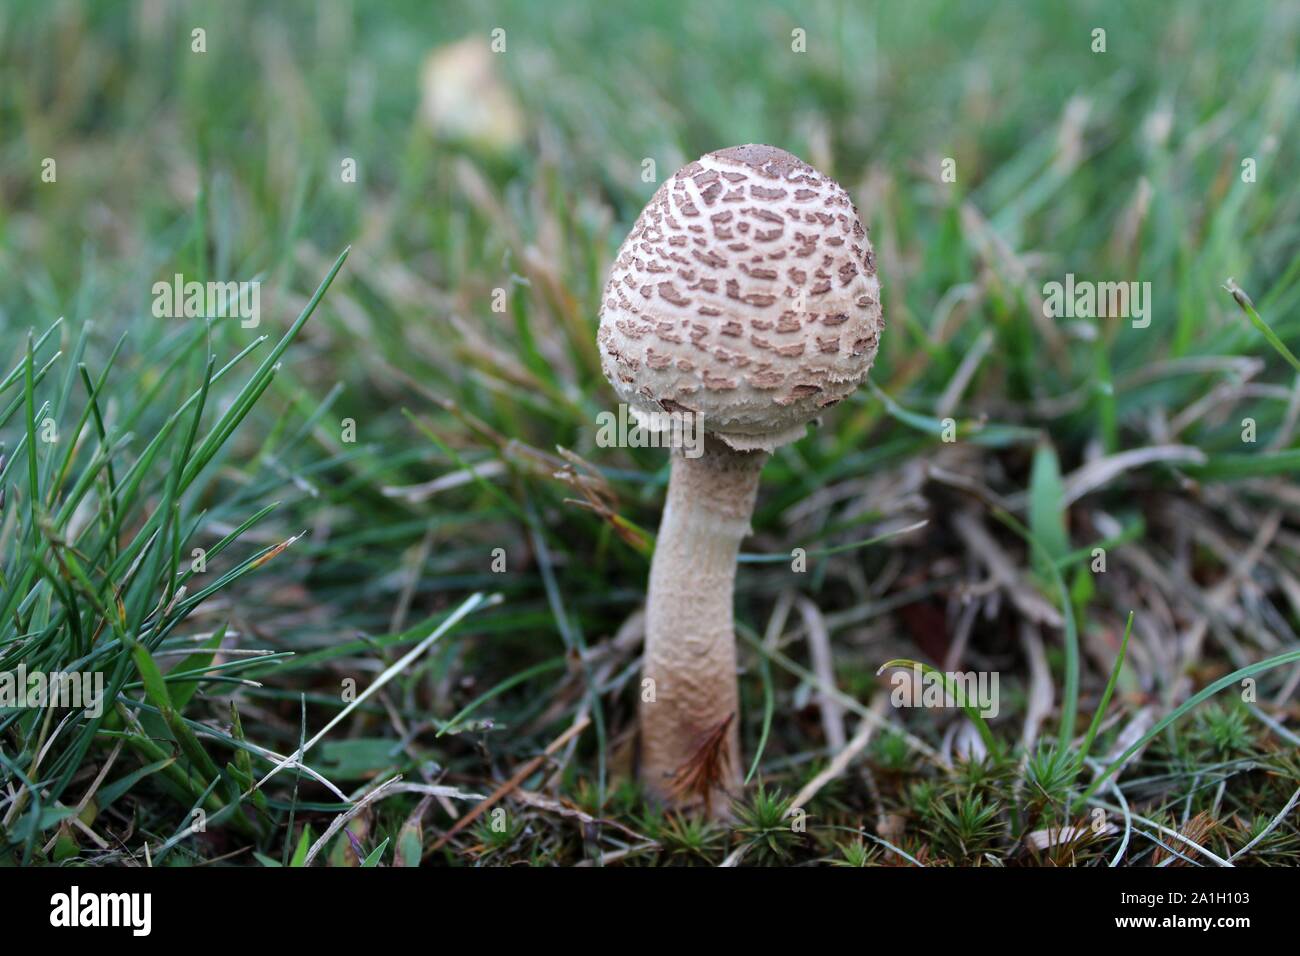 A New Little Toadstool Pops Up Through The Grass Stock Photo